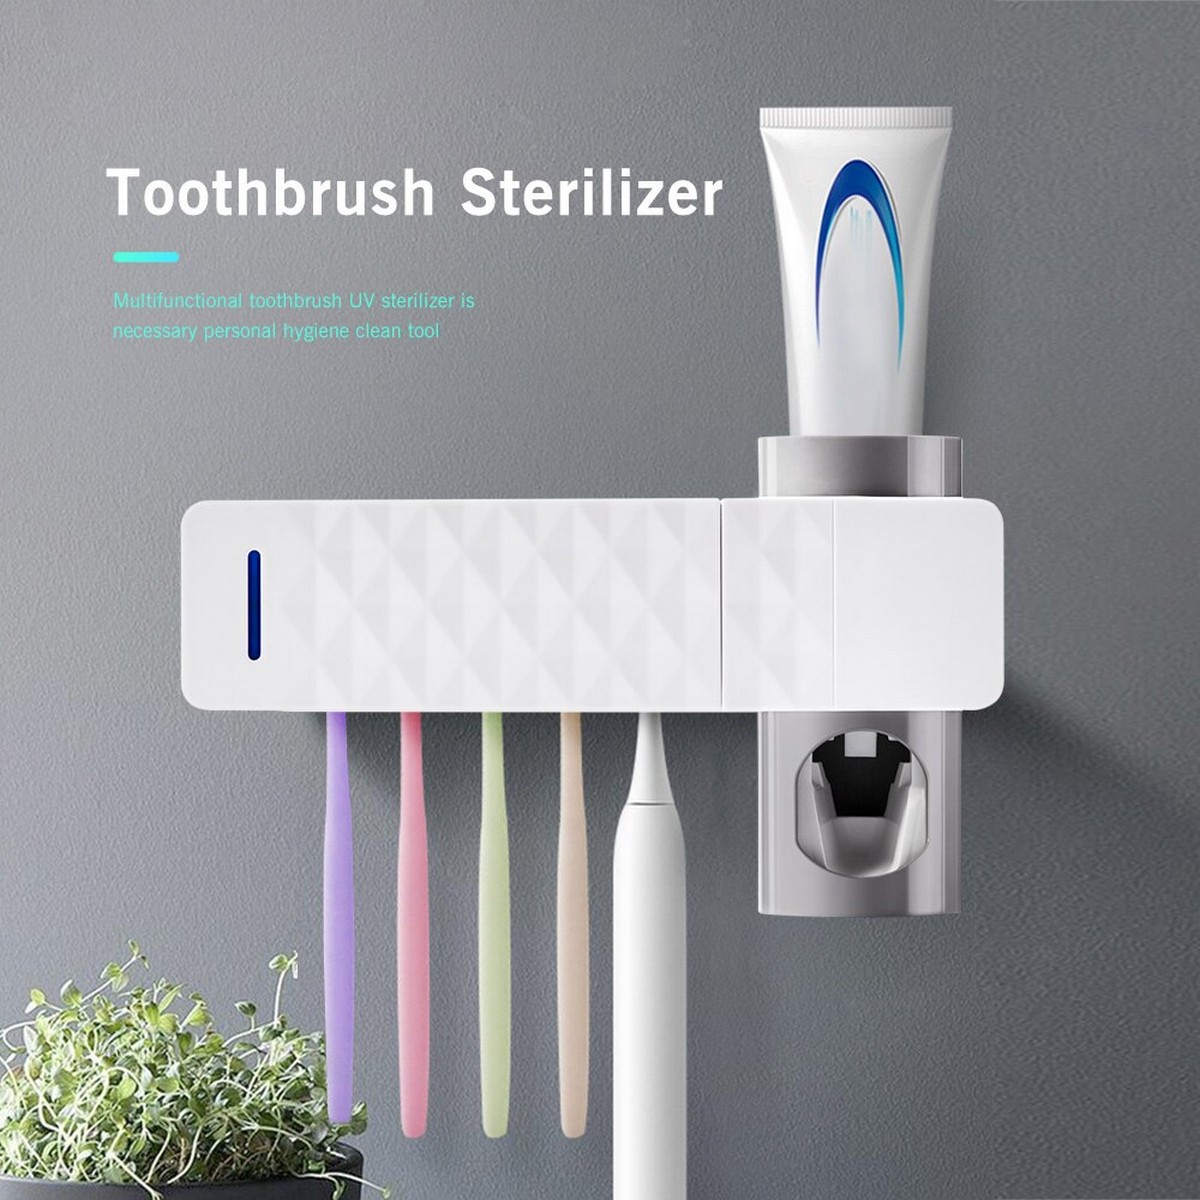 sterilization of toothbrushes